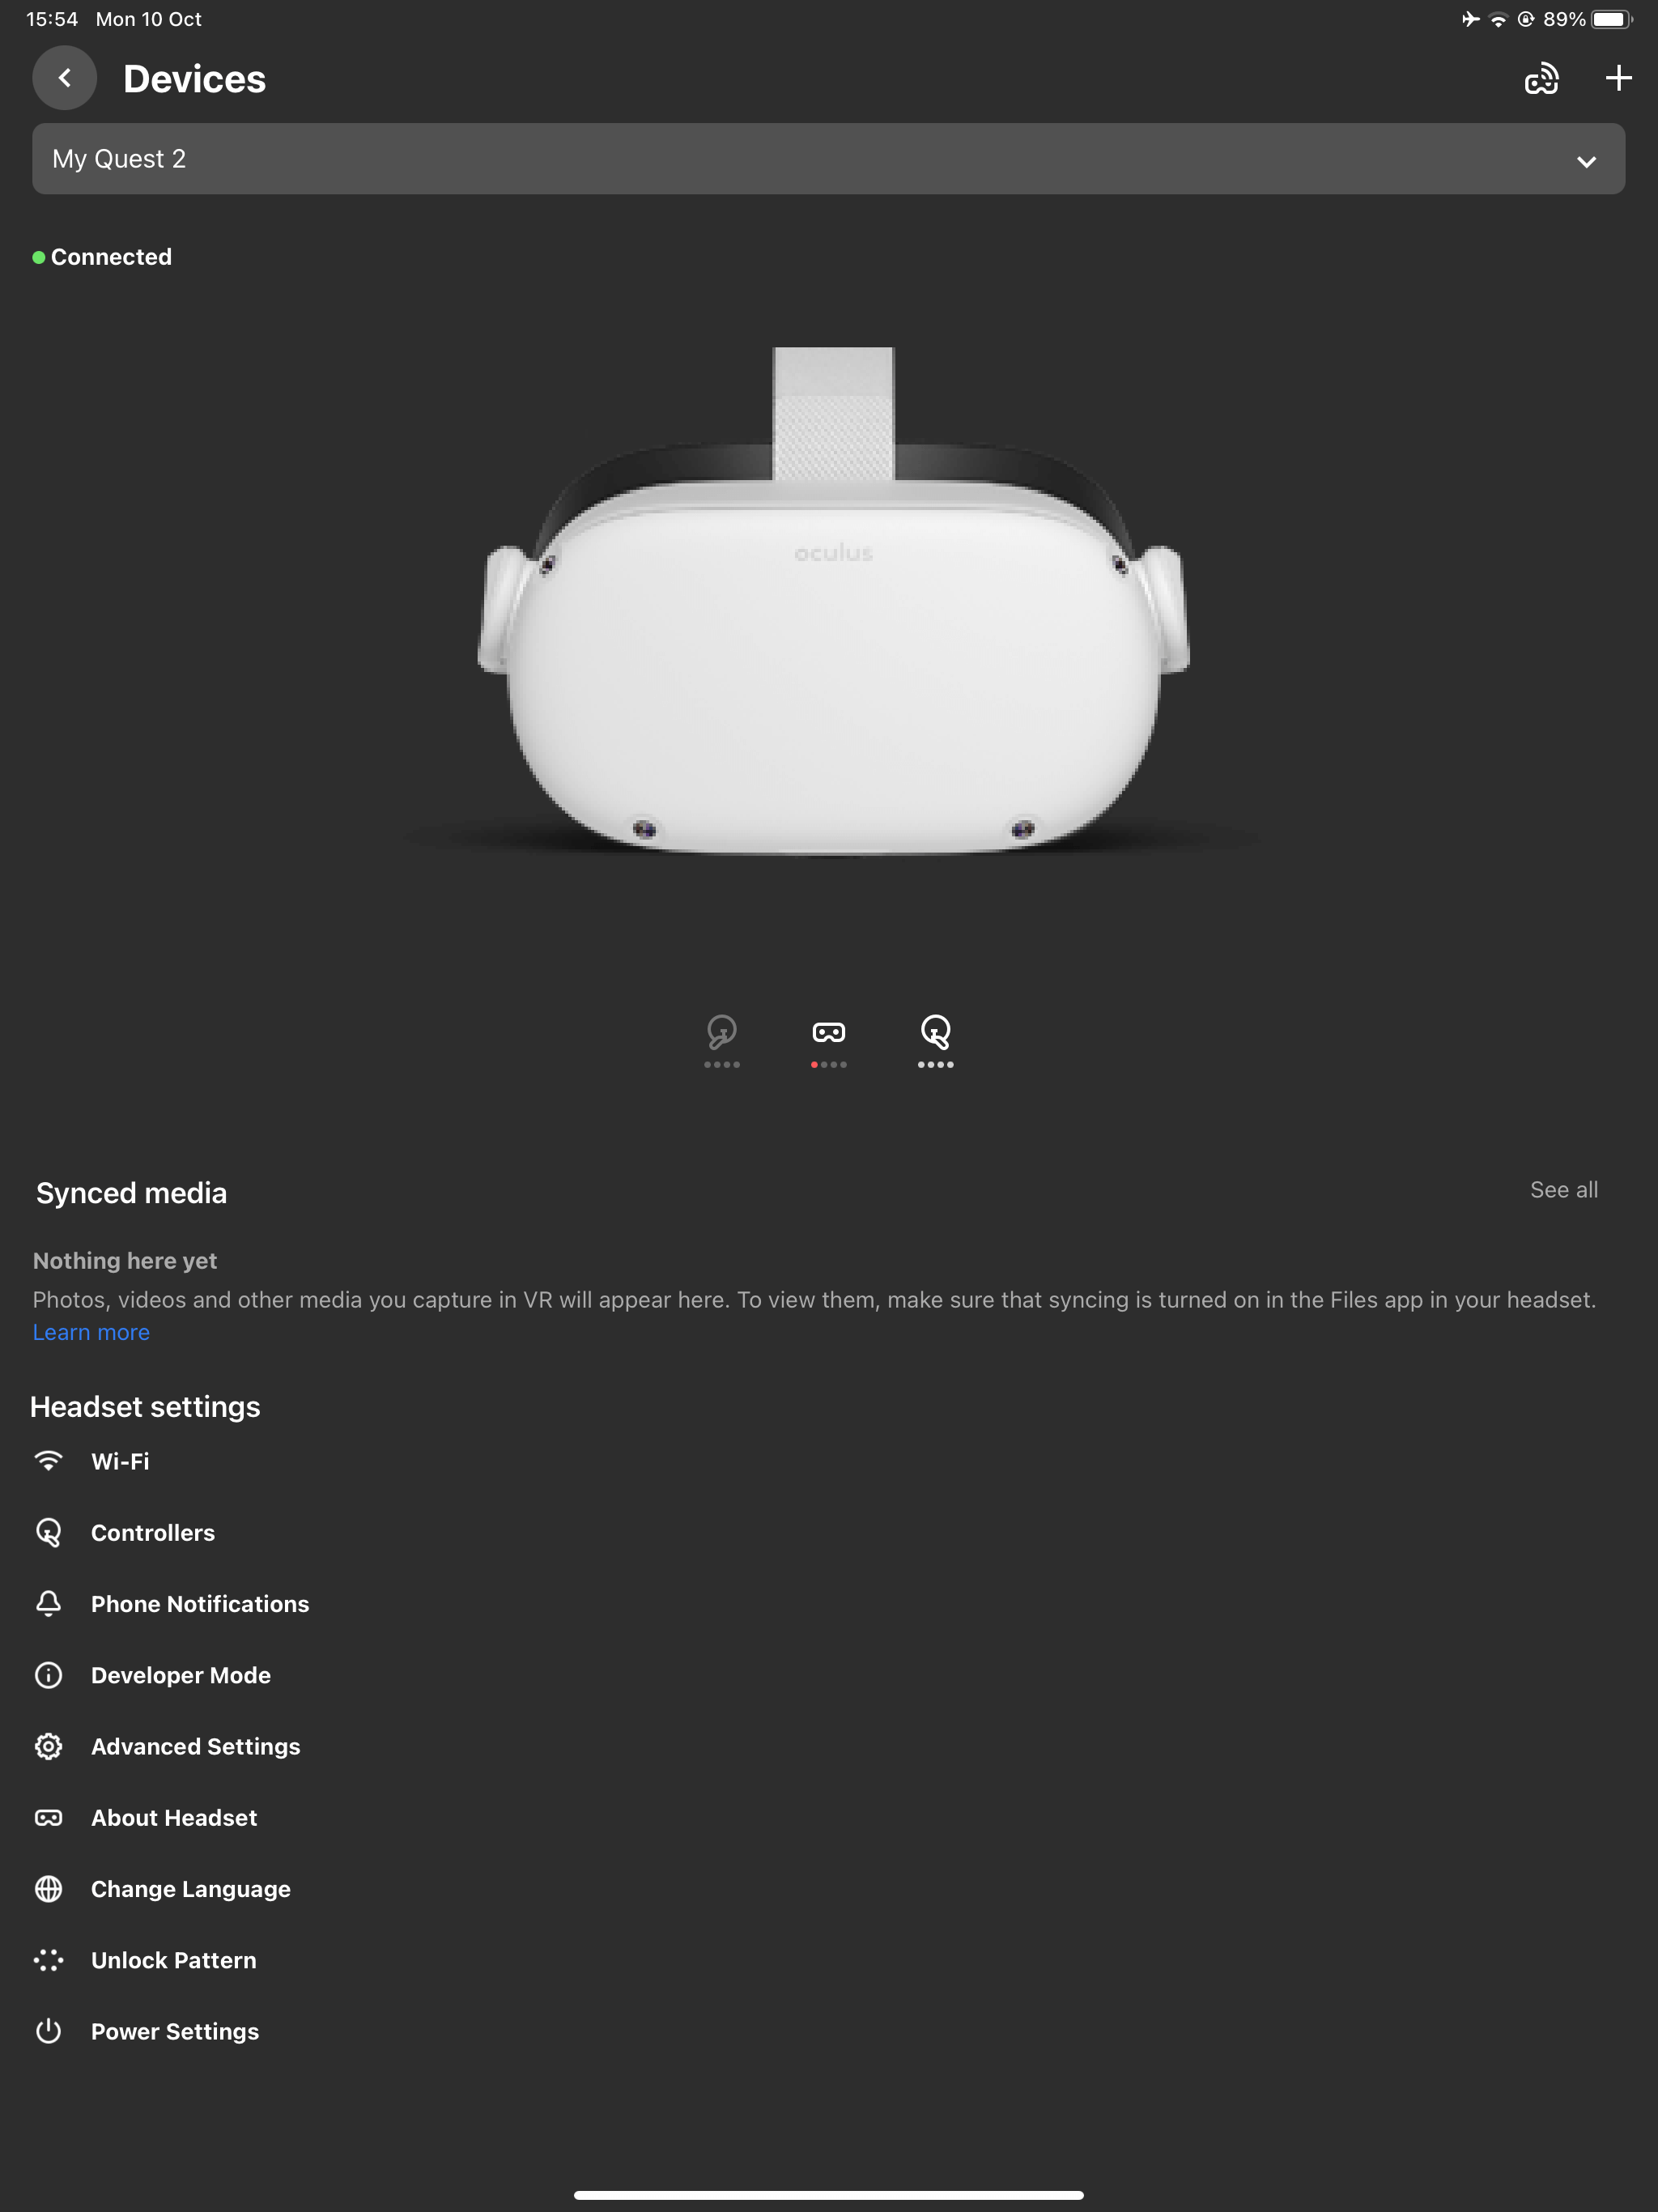 How to enable developer mode on Oculus Quest 2 - Select Dev mode